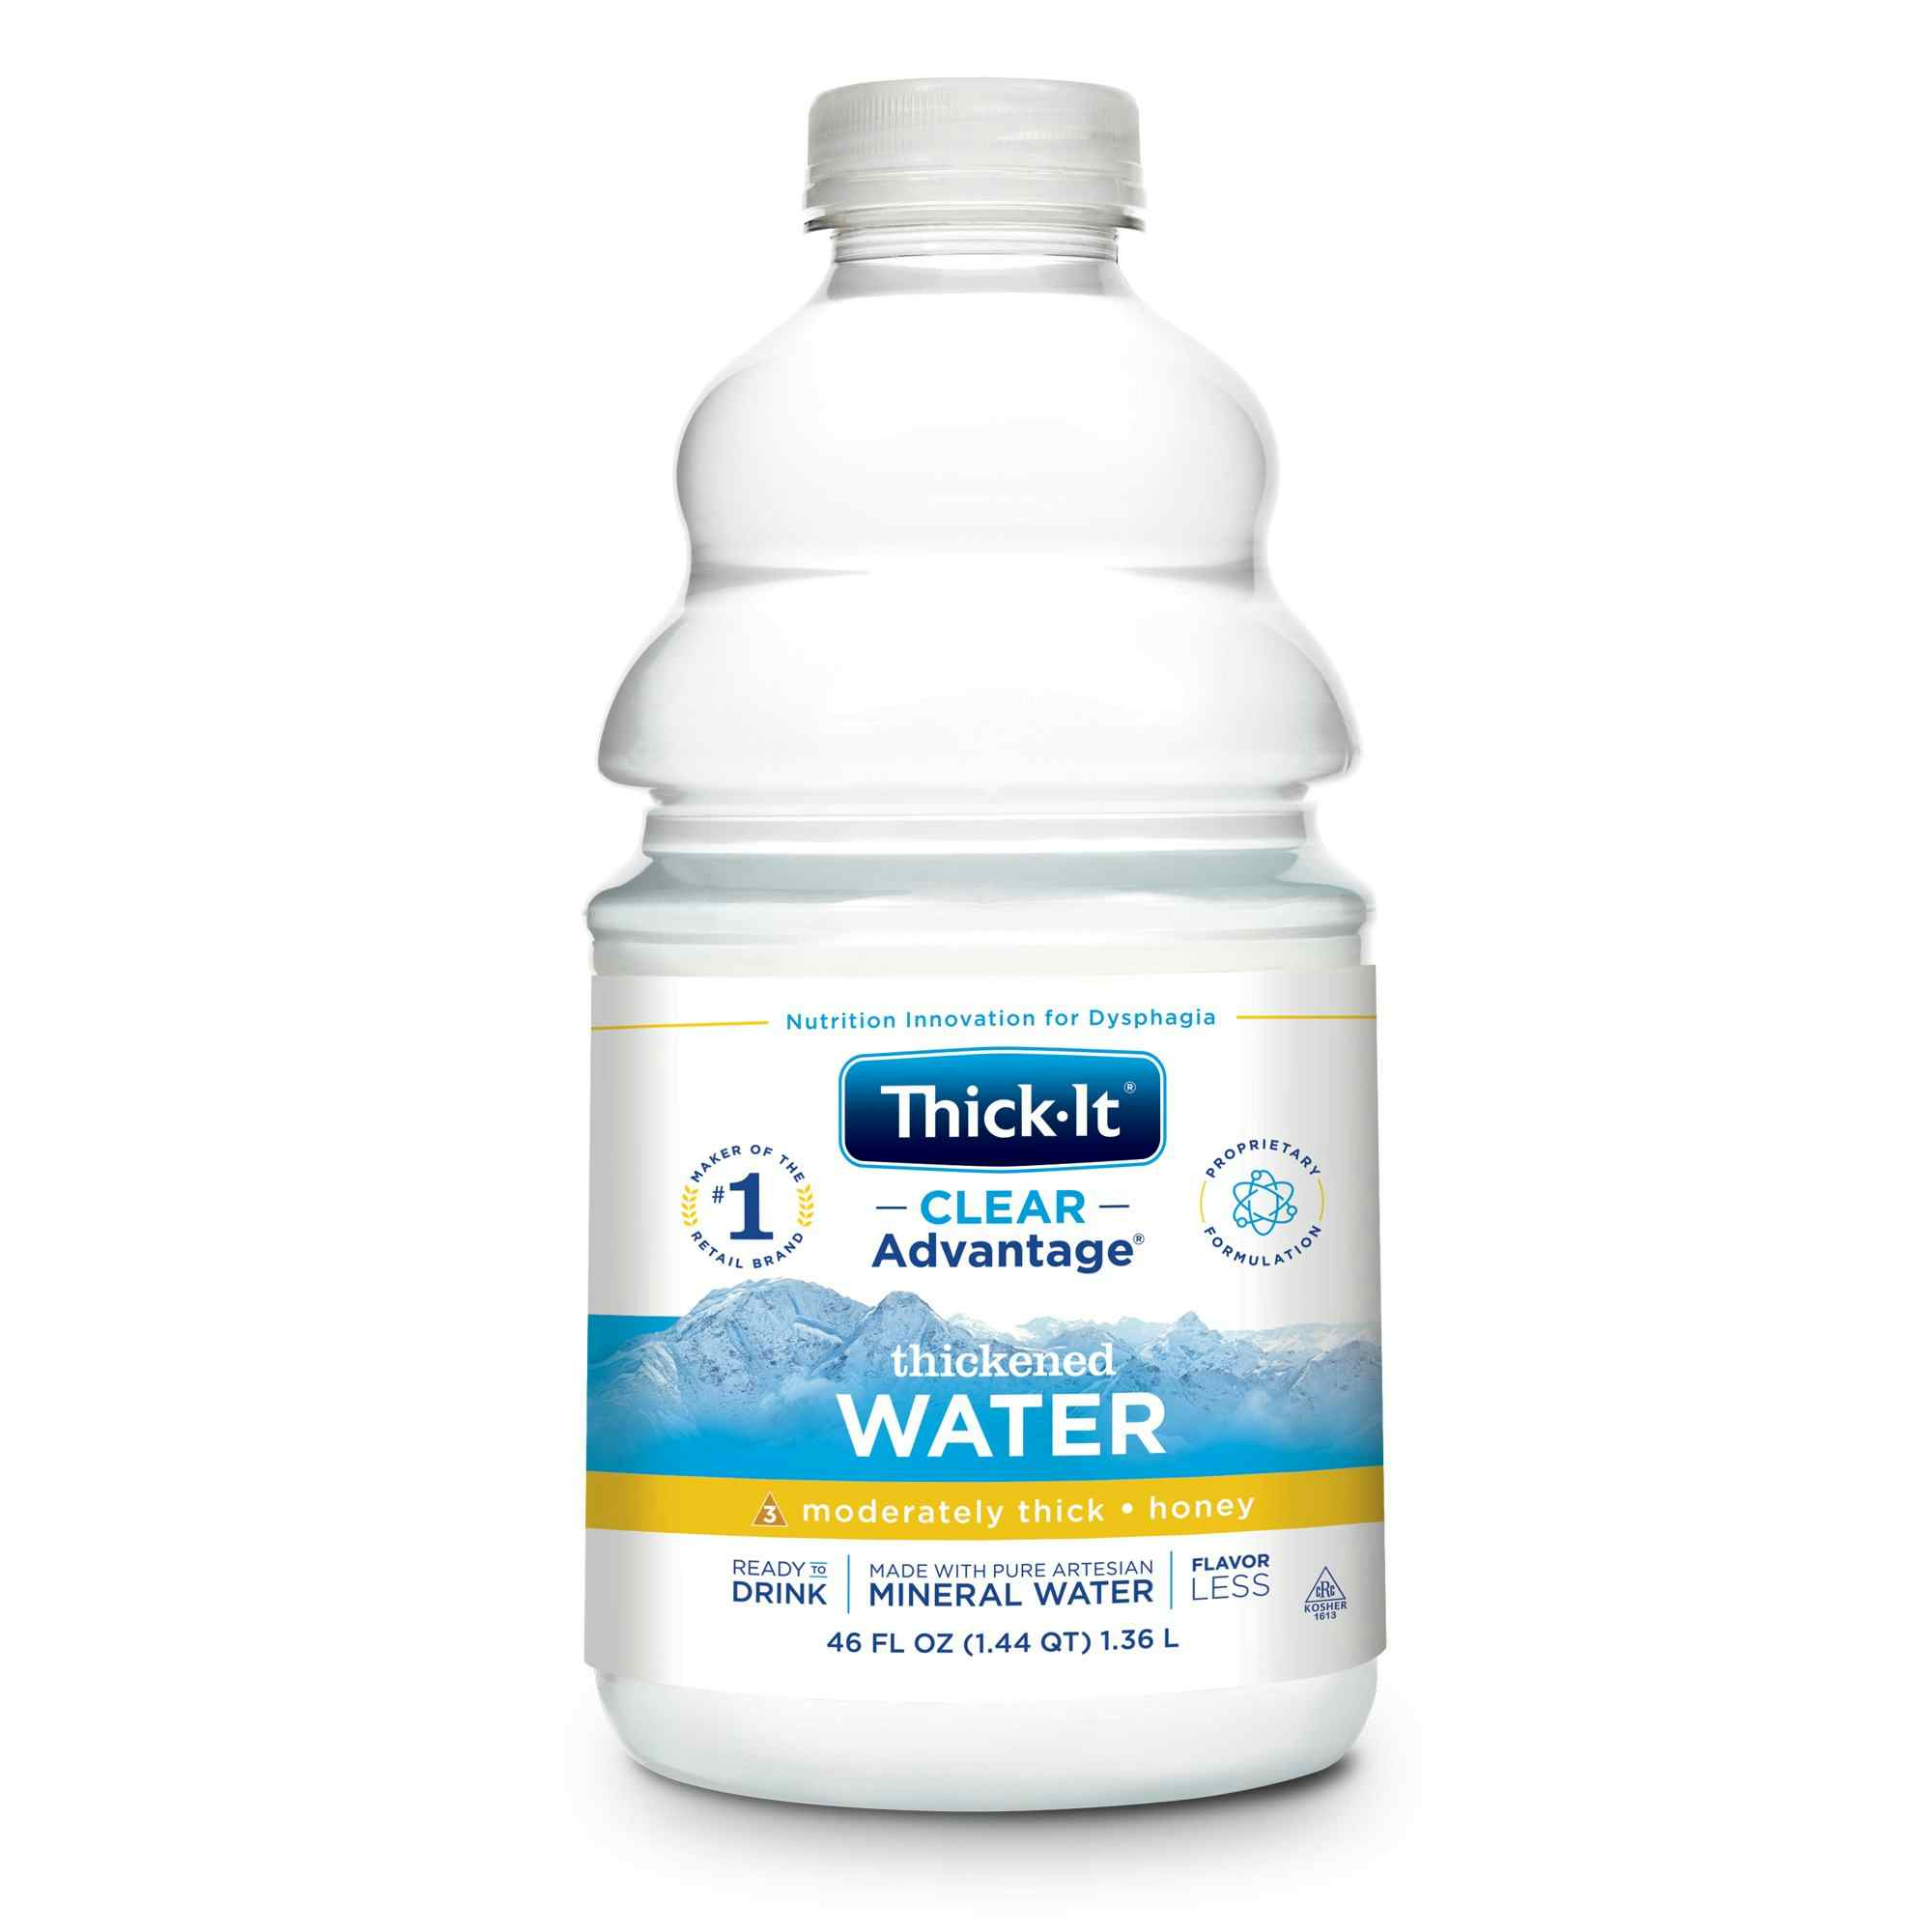 Thick-It Clear Advantage Thickened Water, Honey Consistency, Moderately Thick, B481-A7044, 48 oz. - Case of 4